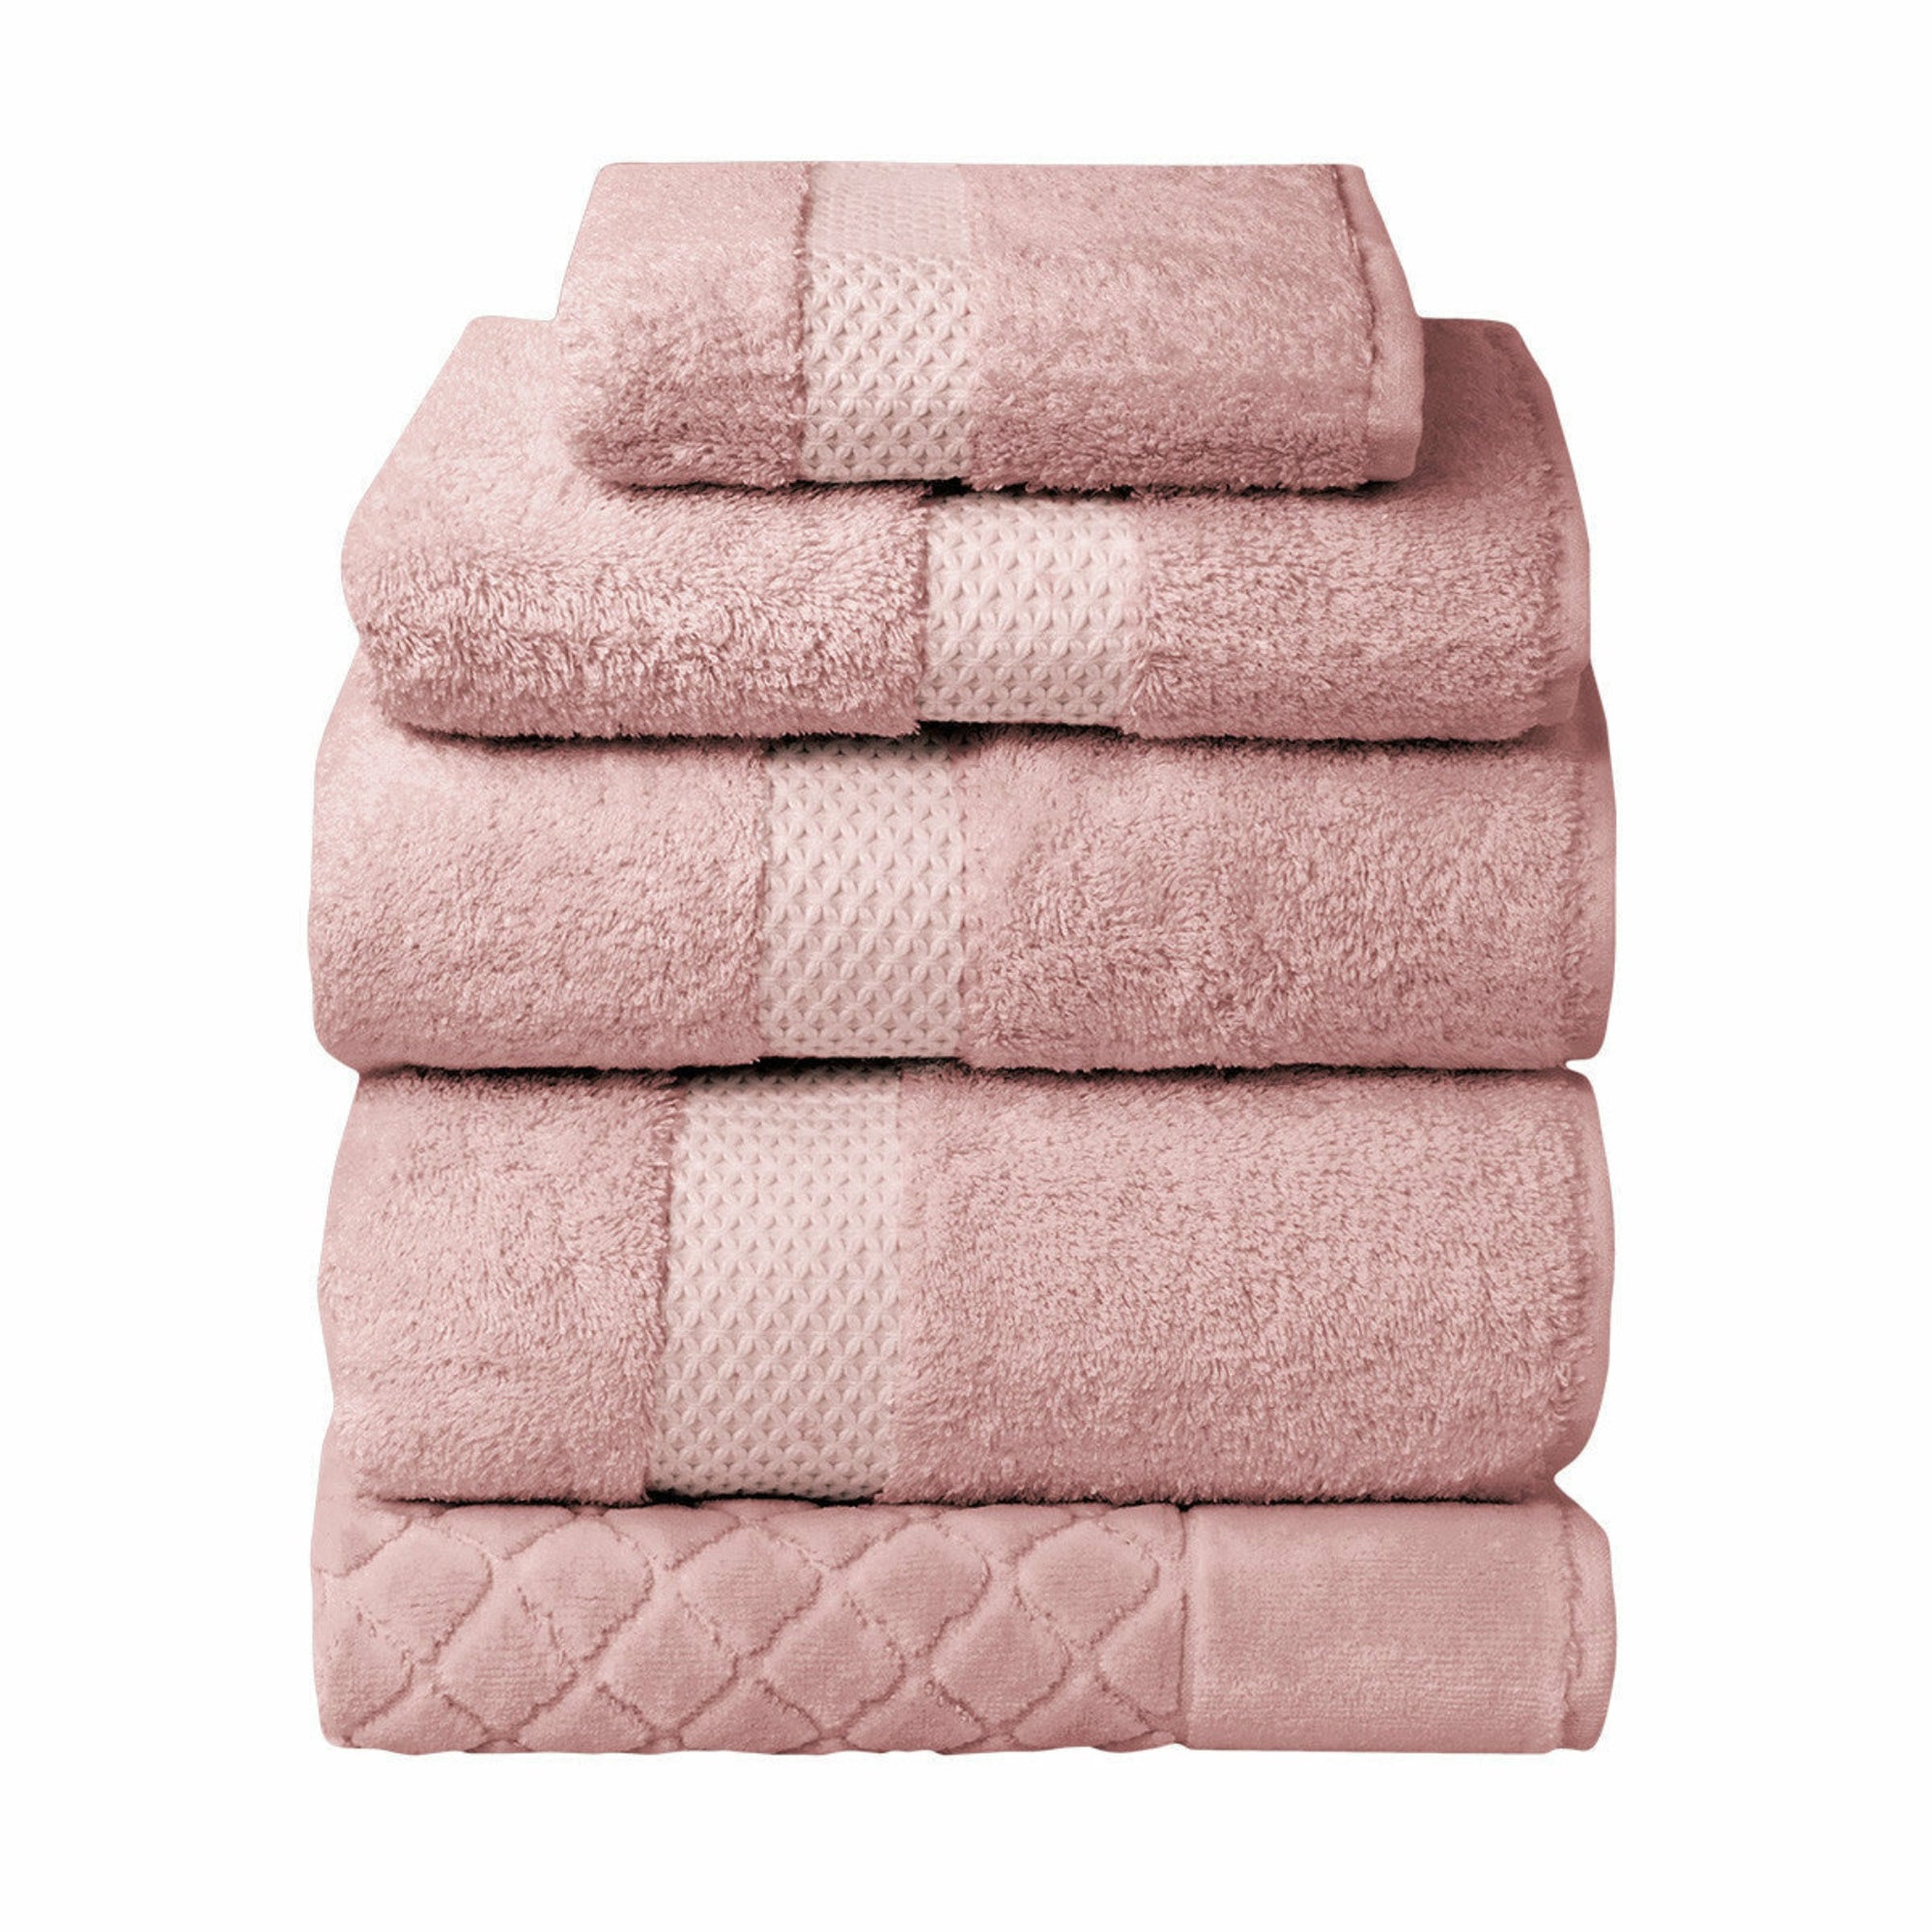 Yves Delorme Etoile Bath Towels and Mats Main The Rose Fine Linens